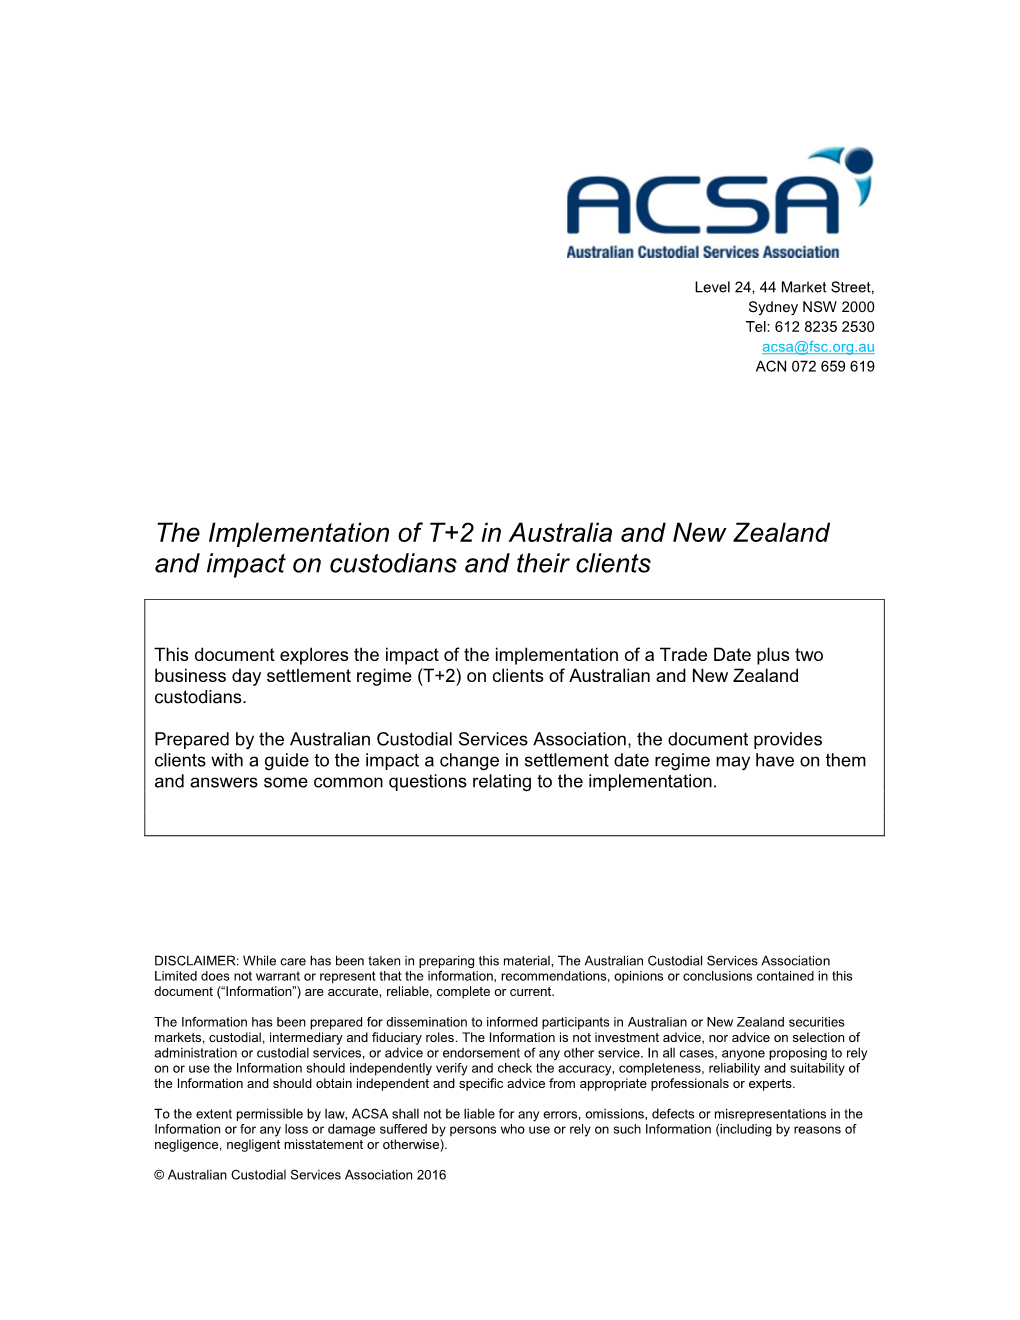 The Implementation of T+2 in Australia and New Zealand and Impact on Custodians and Their Clients